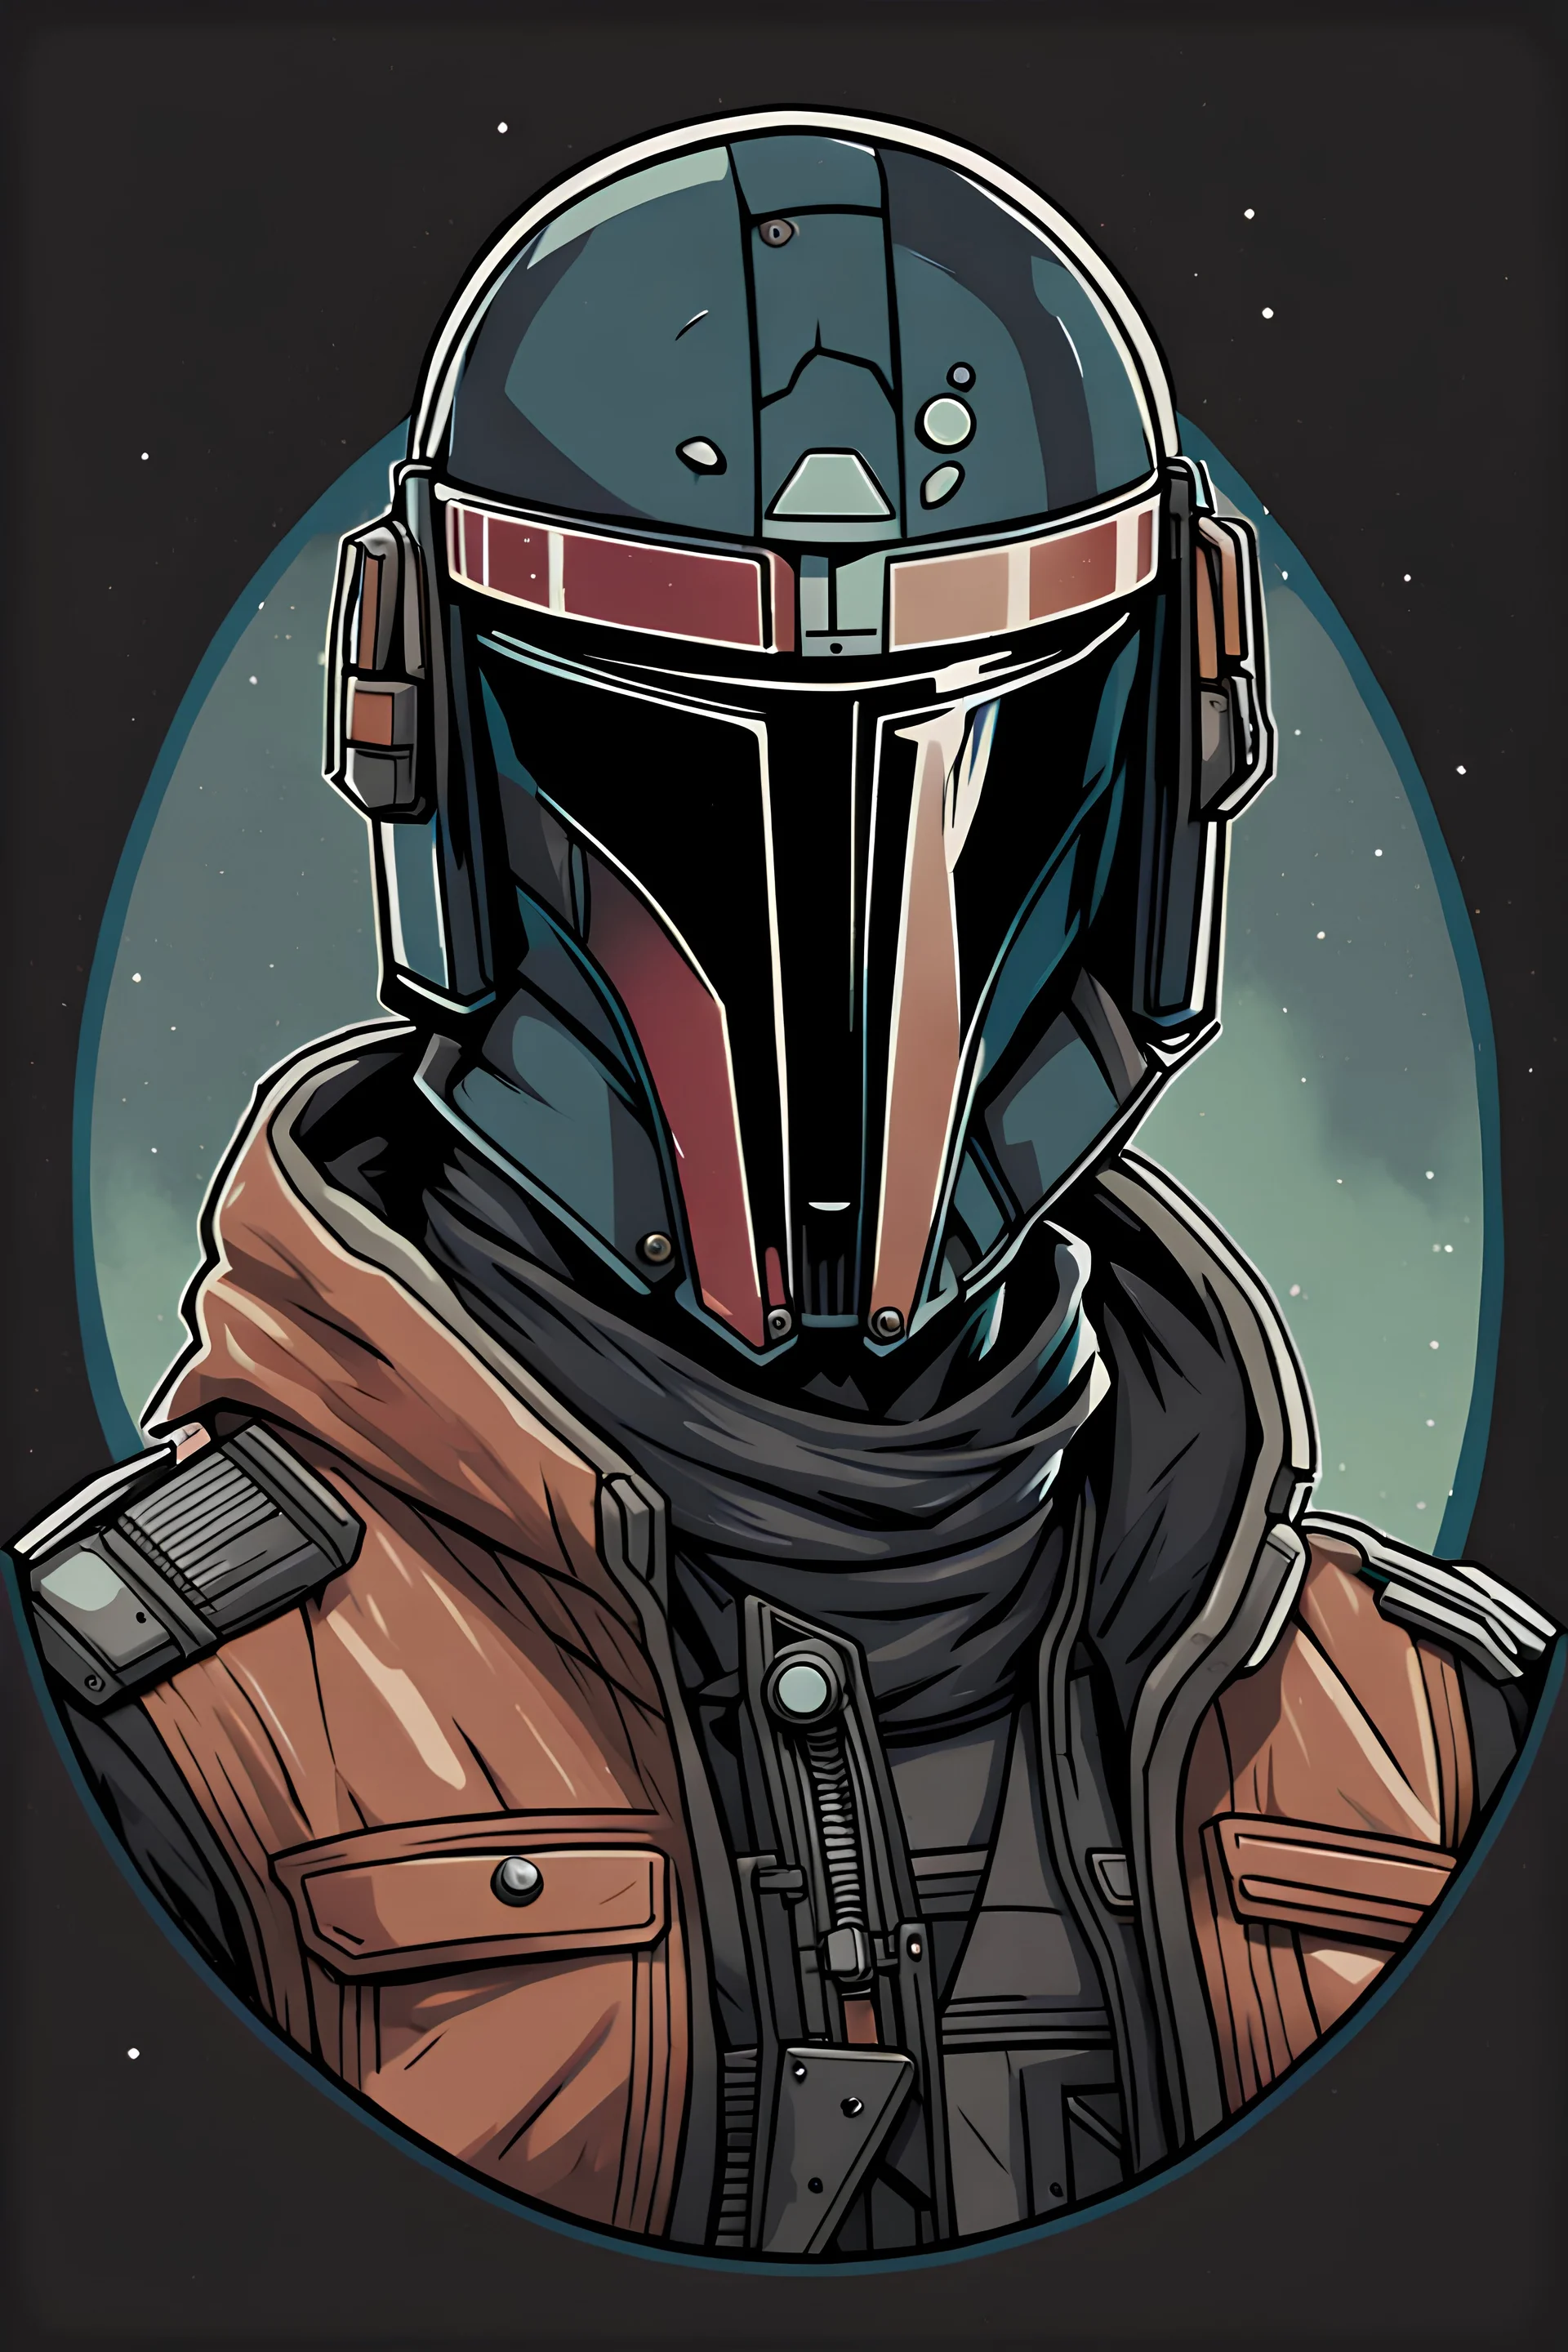 High Quality Science Fiction Character Portrait of an bounty hunter in a Bomber Jacket. Illustrated in the Style of the Archer Tv Series. Wearing a Mandalorian helmet.